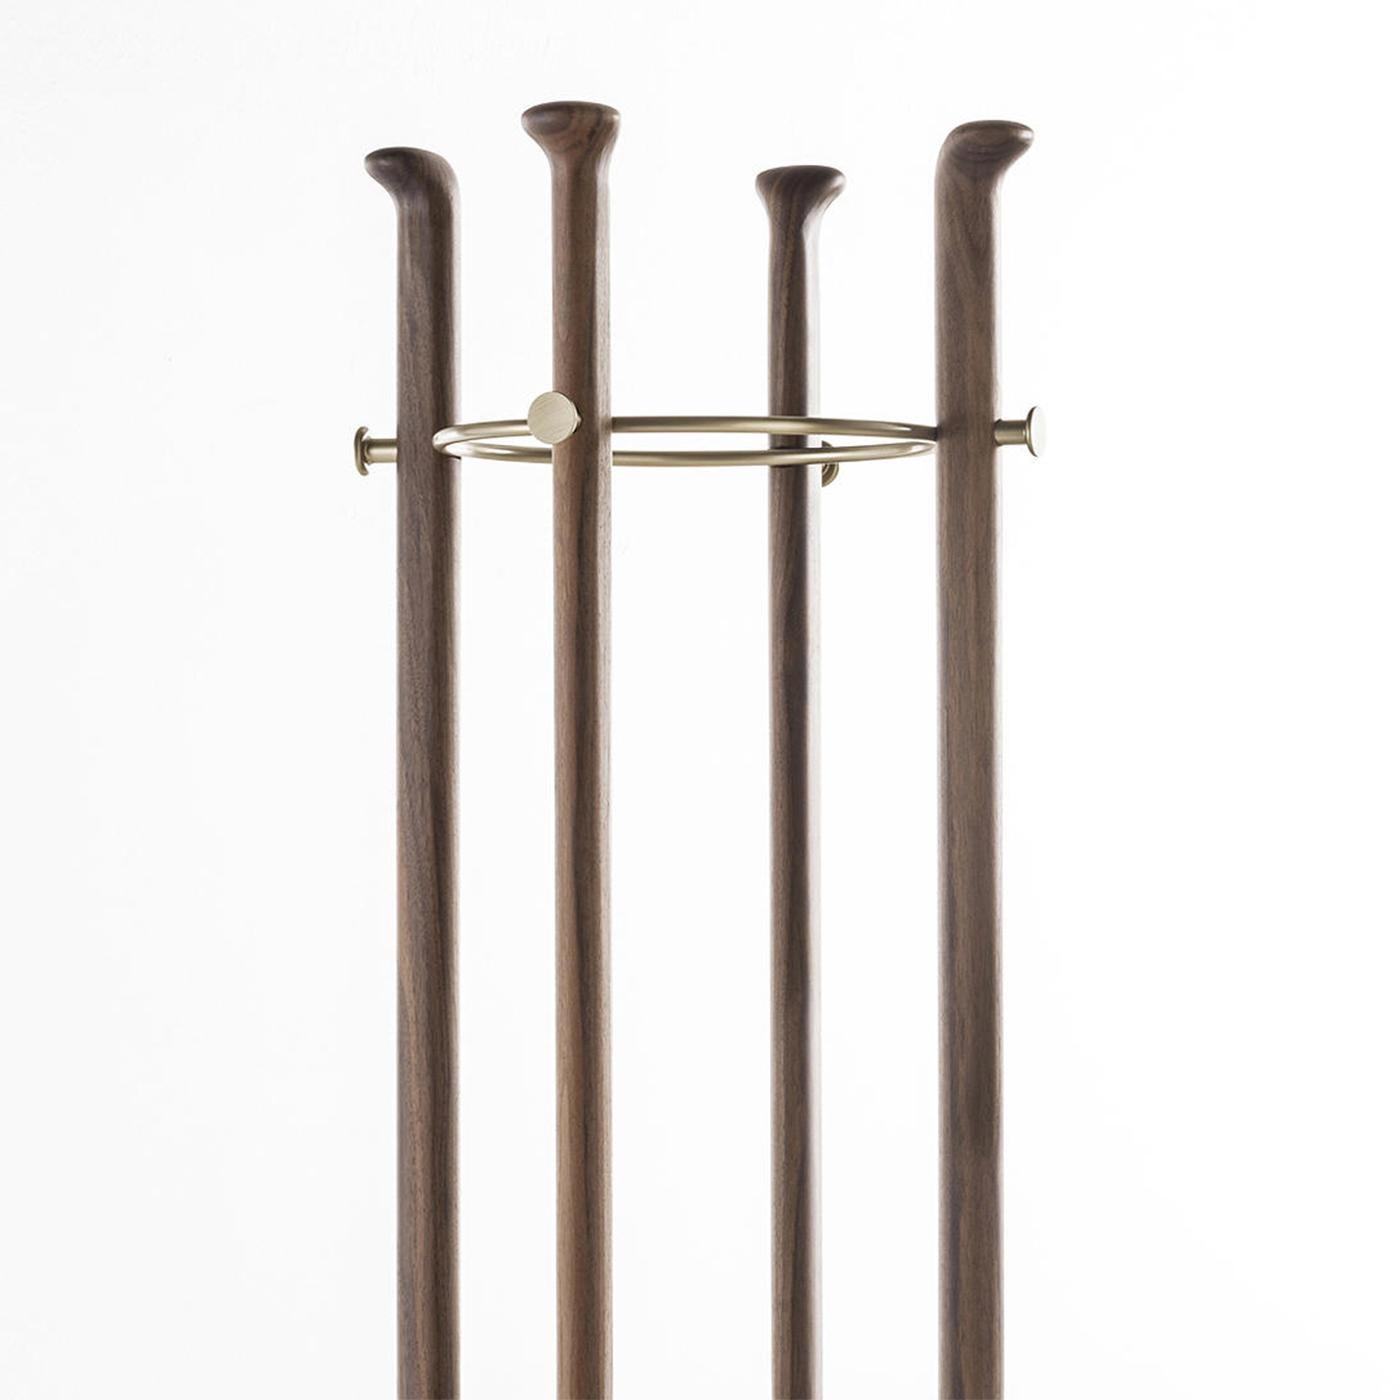 Coatrack Albert with solid walnut wood structure
and with brushed brass top structure. With Carrara
marble base.